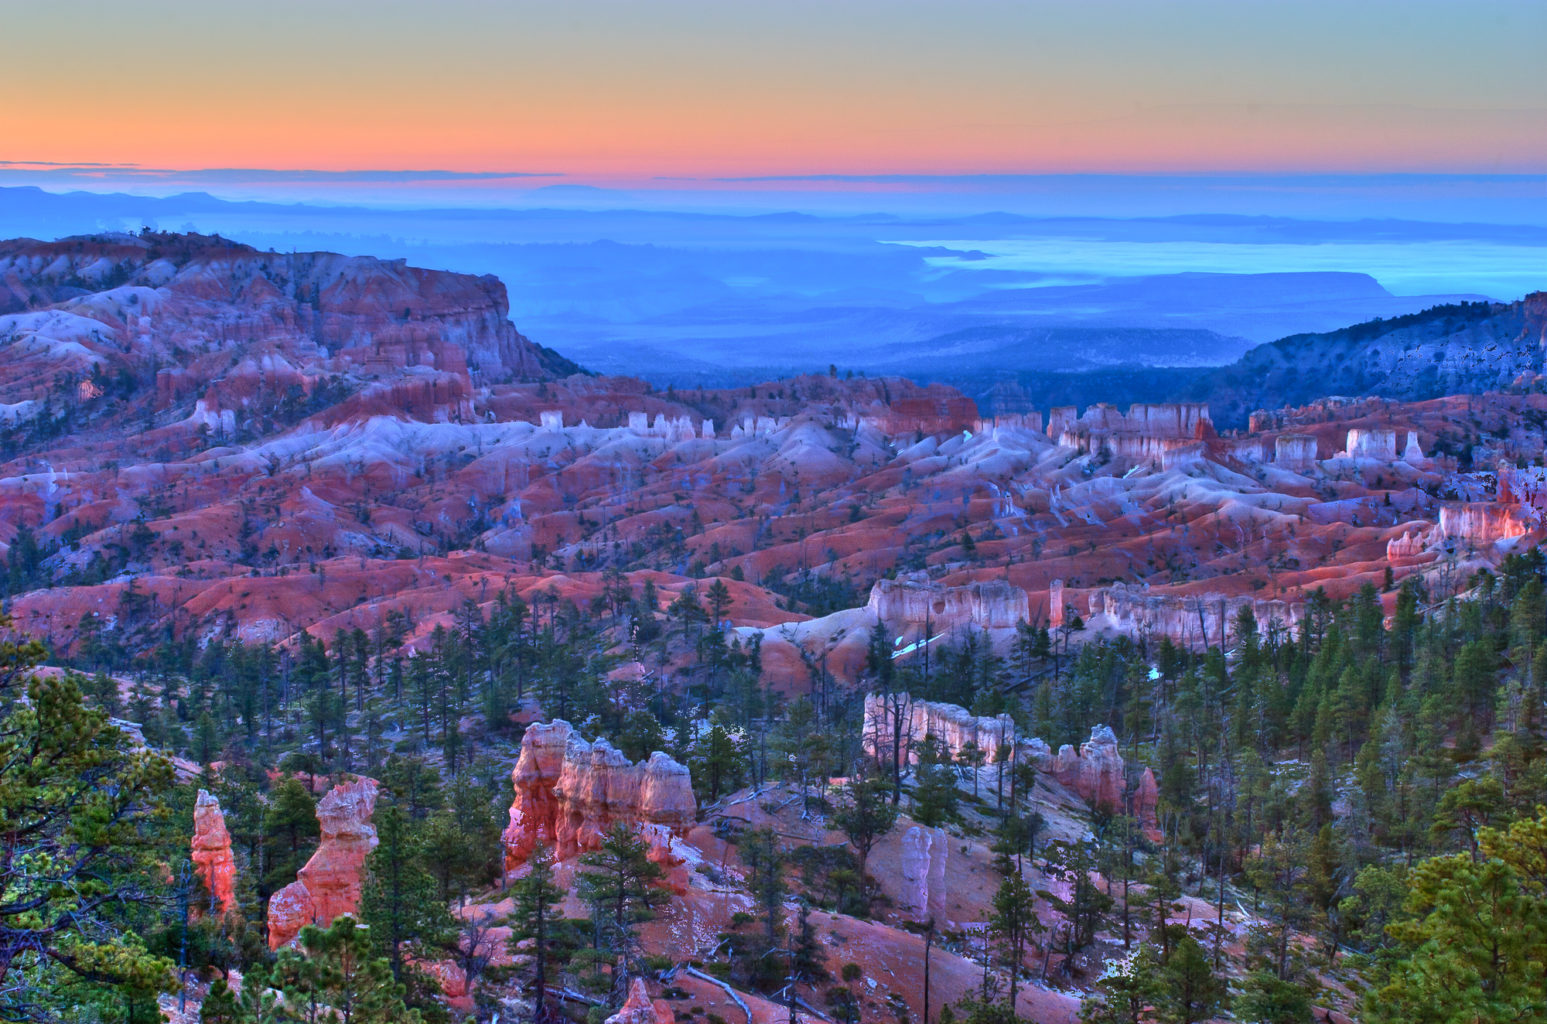 Bryce Canyon, Utah.This image was part of a set that I worked hard to photograph. I recall waking up at about 3:30AM, arriving at the foot of the canyons around 4AM and hiking in pitch-dark to get to the spot (forgot to carry a flashlight!). I had taken this image when my eyes could barely see over the horizon. This is the effect of accumulating light over 30 or more seconds! The best part of hiking back at about 7AM (besides being able to see where we were going) was that we saw other photographers hiking up to the spot where we stood a few minutes ago. By then, the light level was too bringht to capture the suble colors and snow. The early bird indeed got the worm!